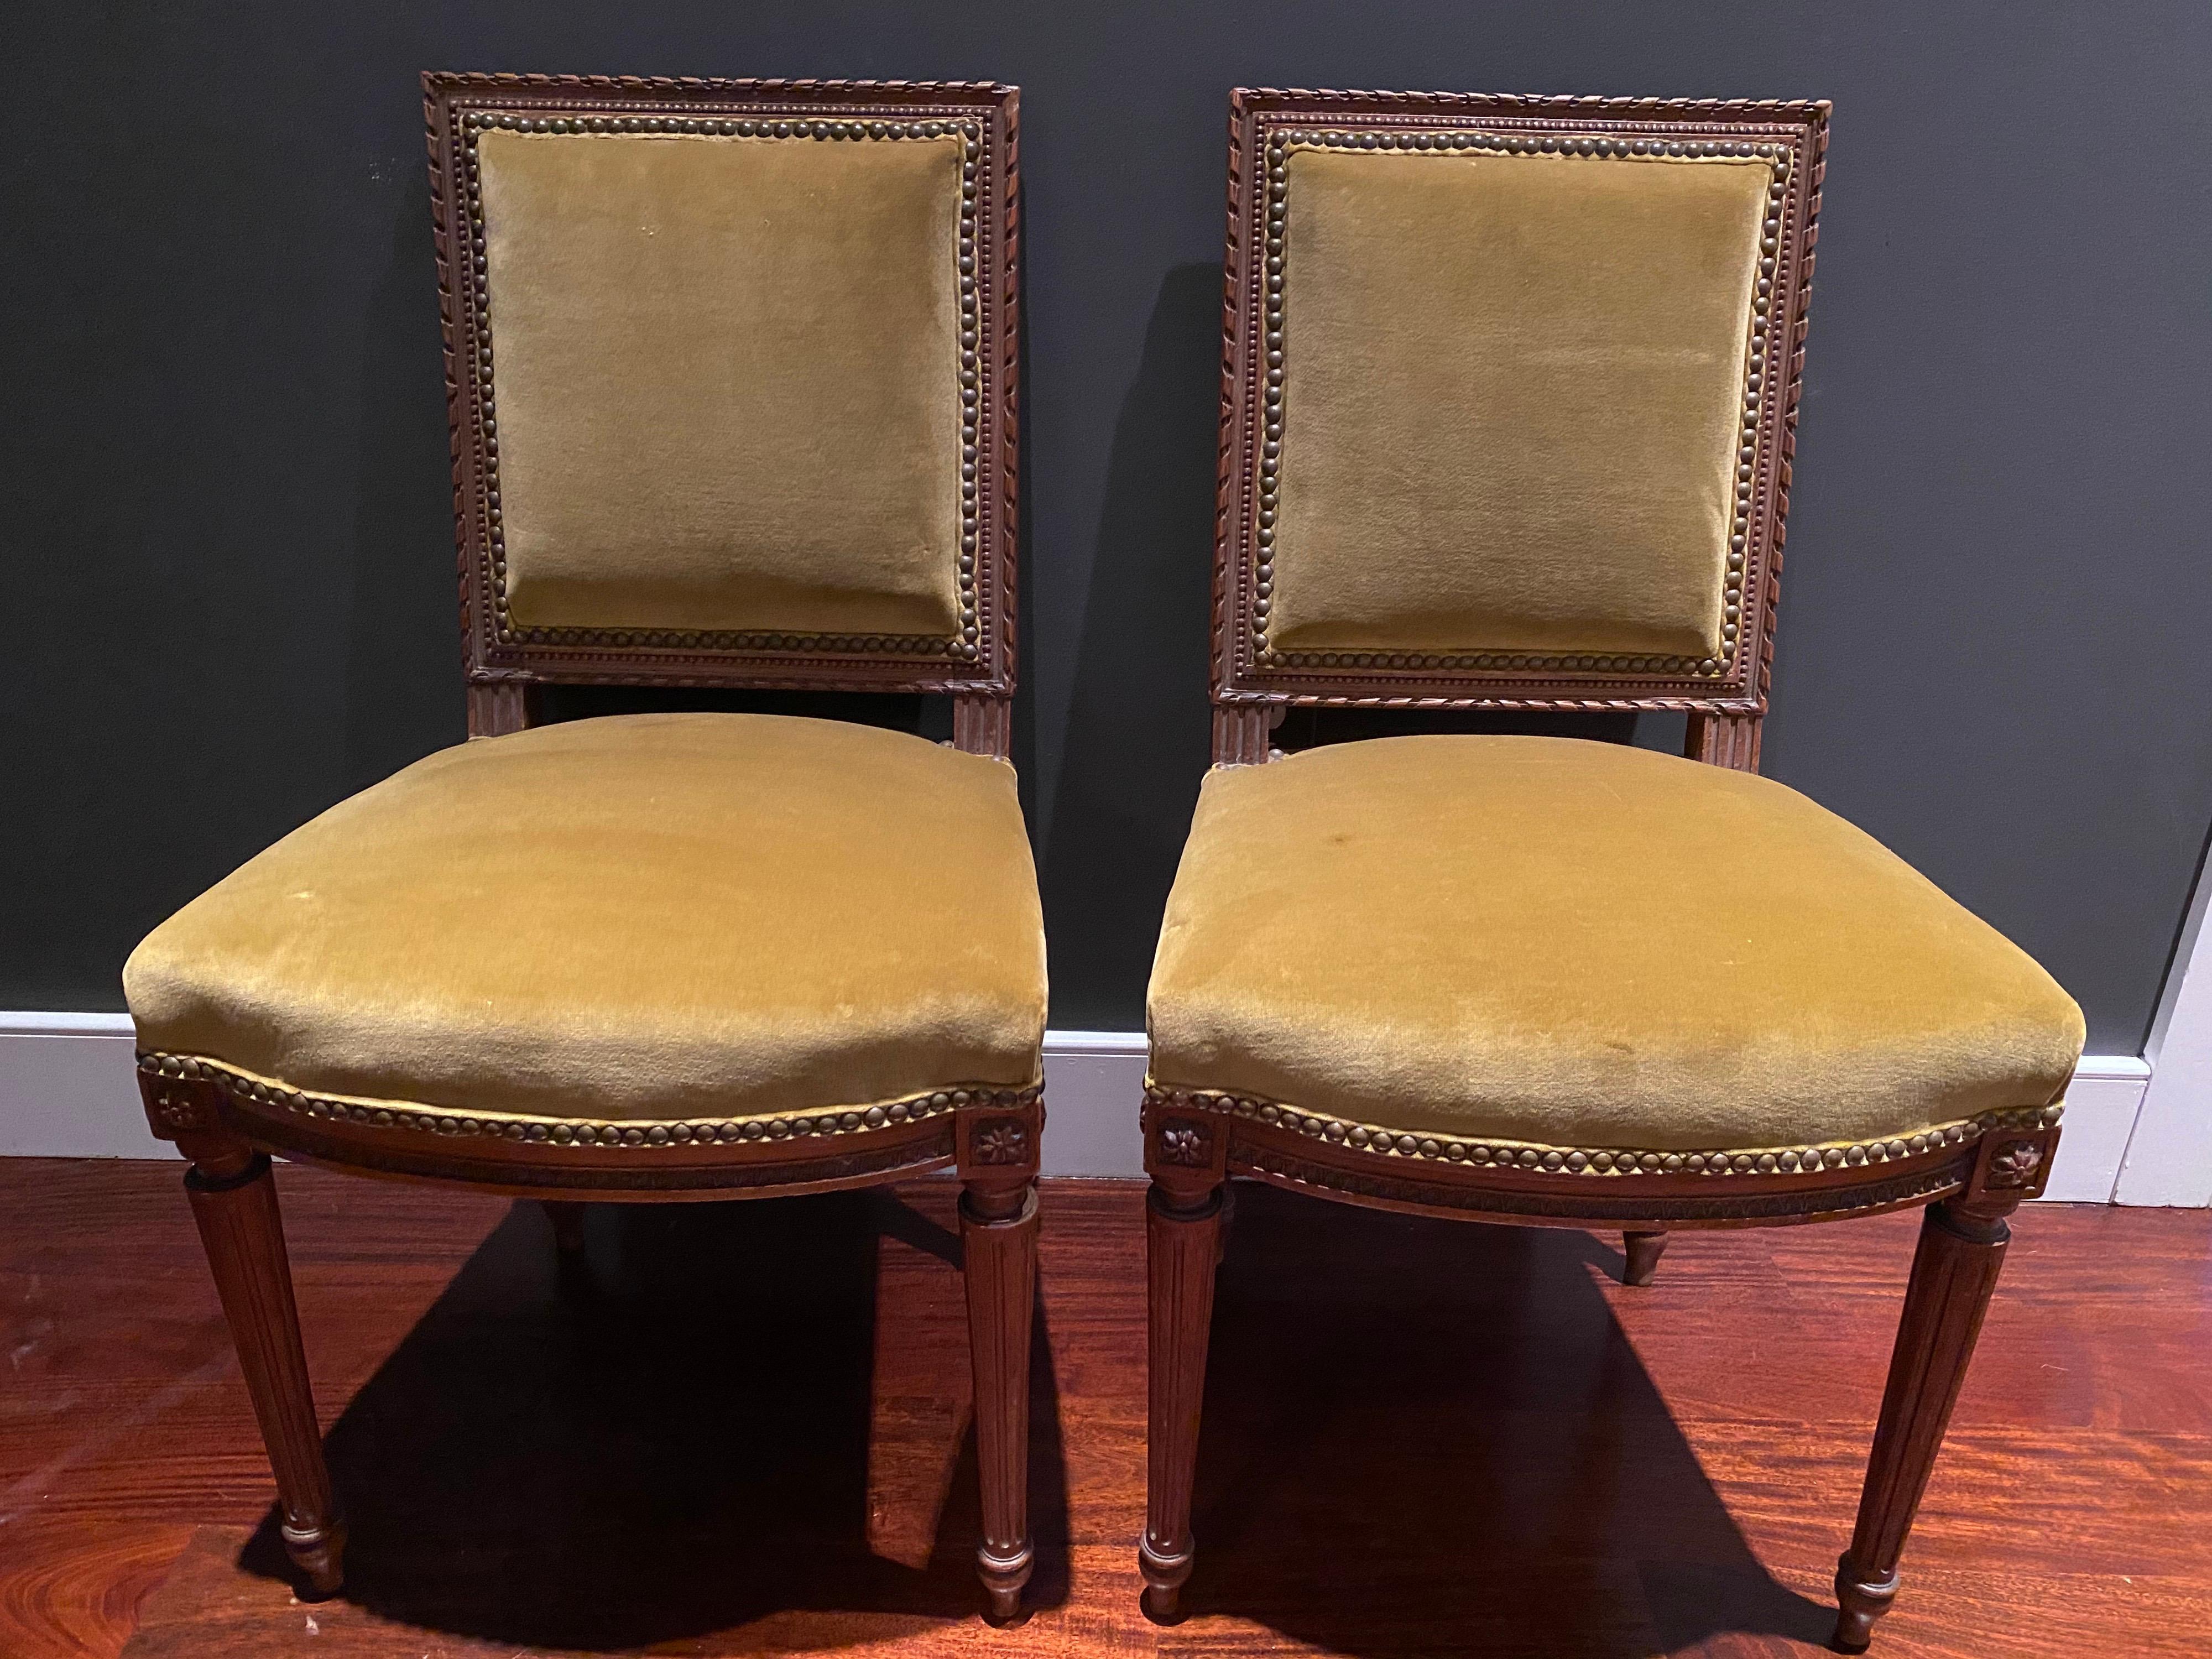 A pair of Louis XVI style side chairs upholstered in mustard yellow velvet with contrasting white cotton backs.